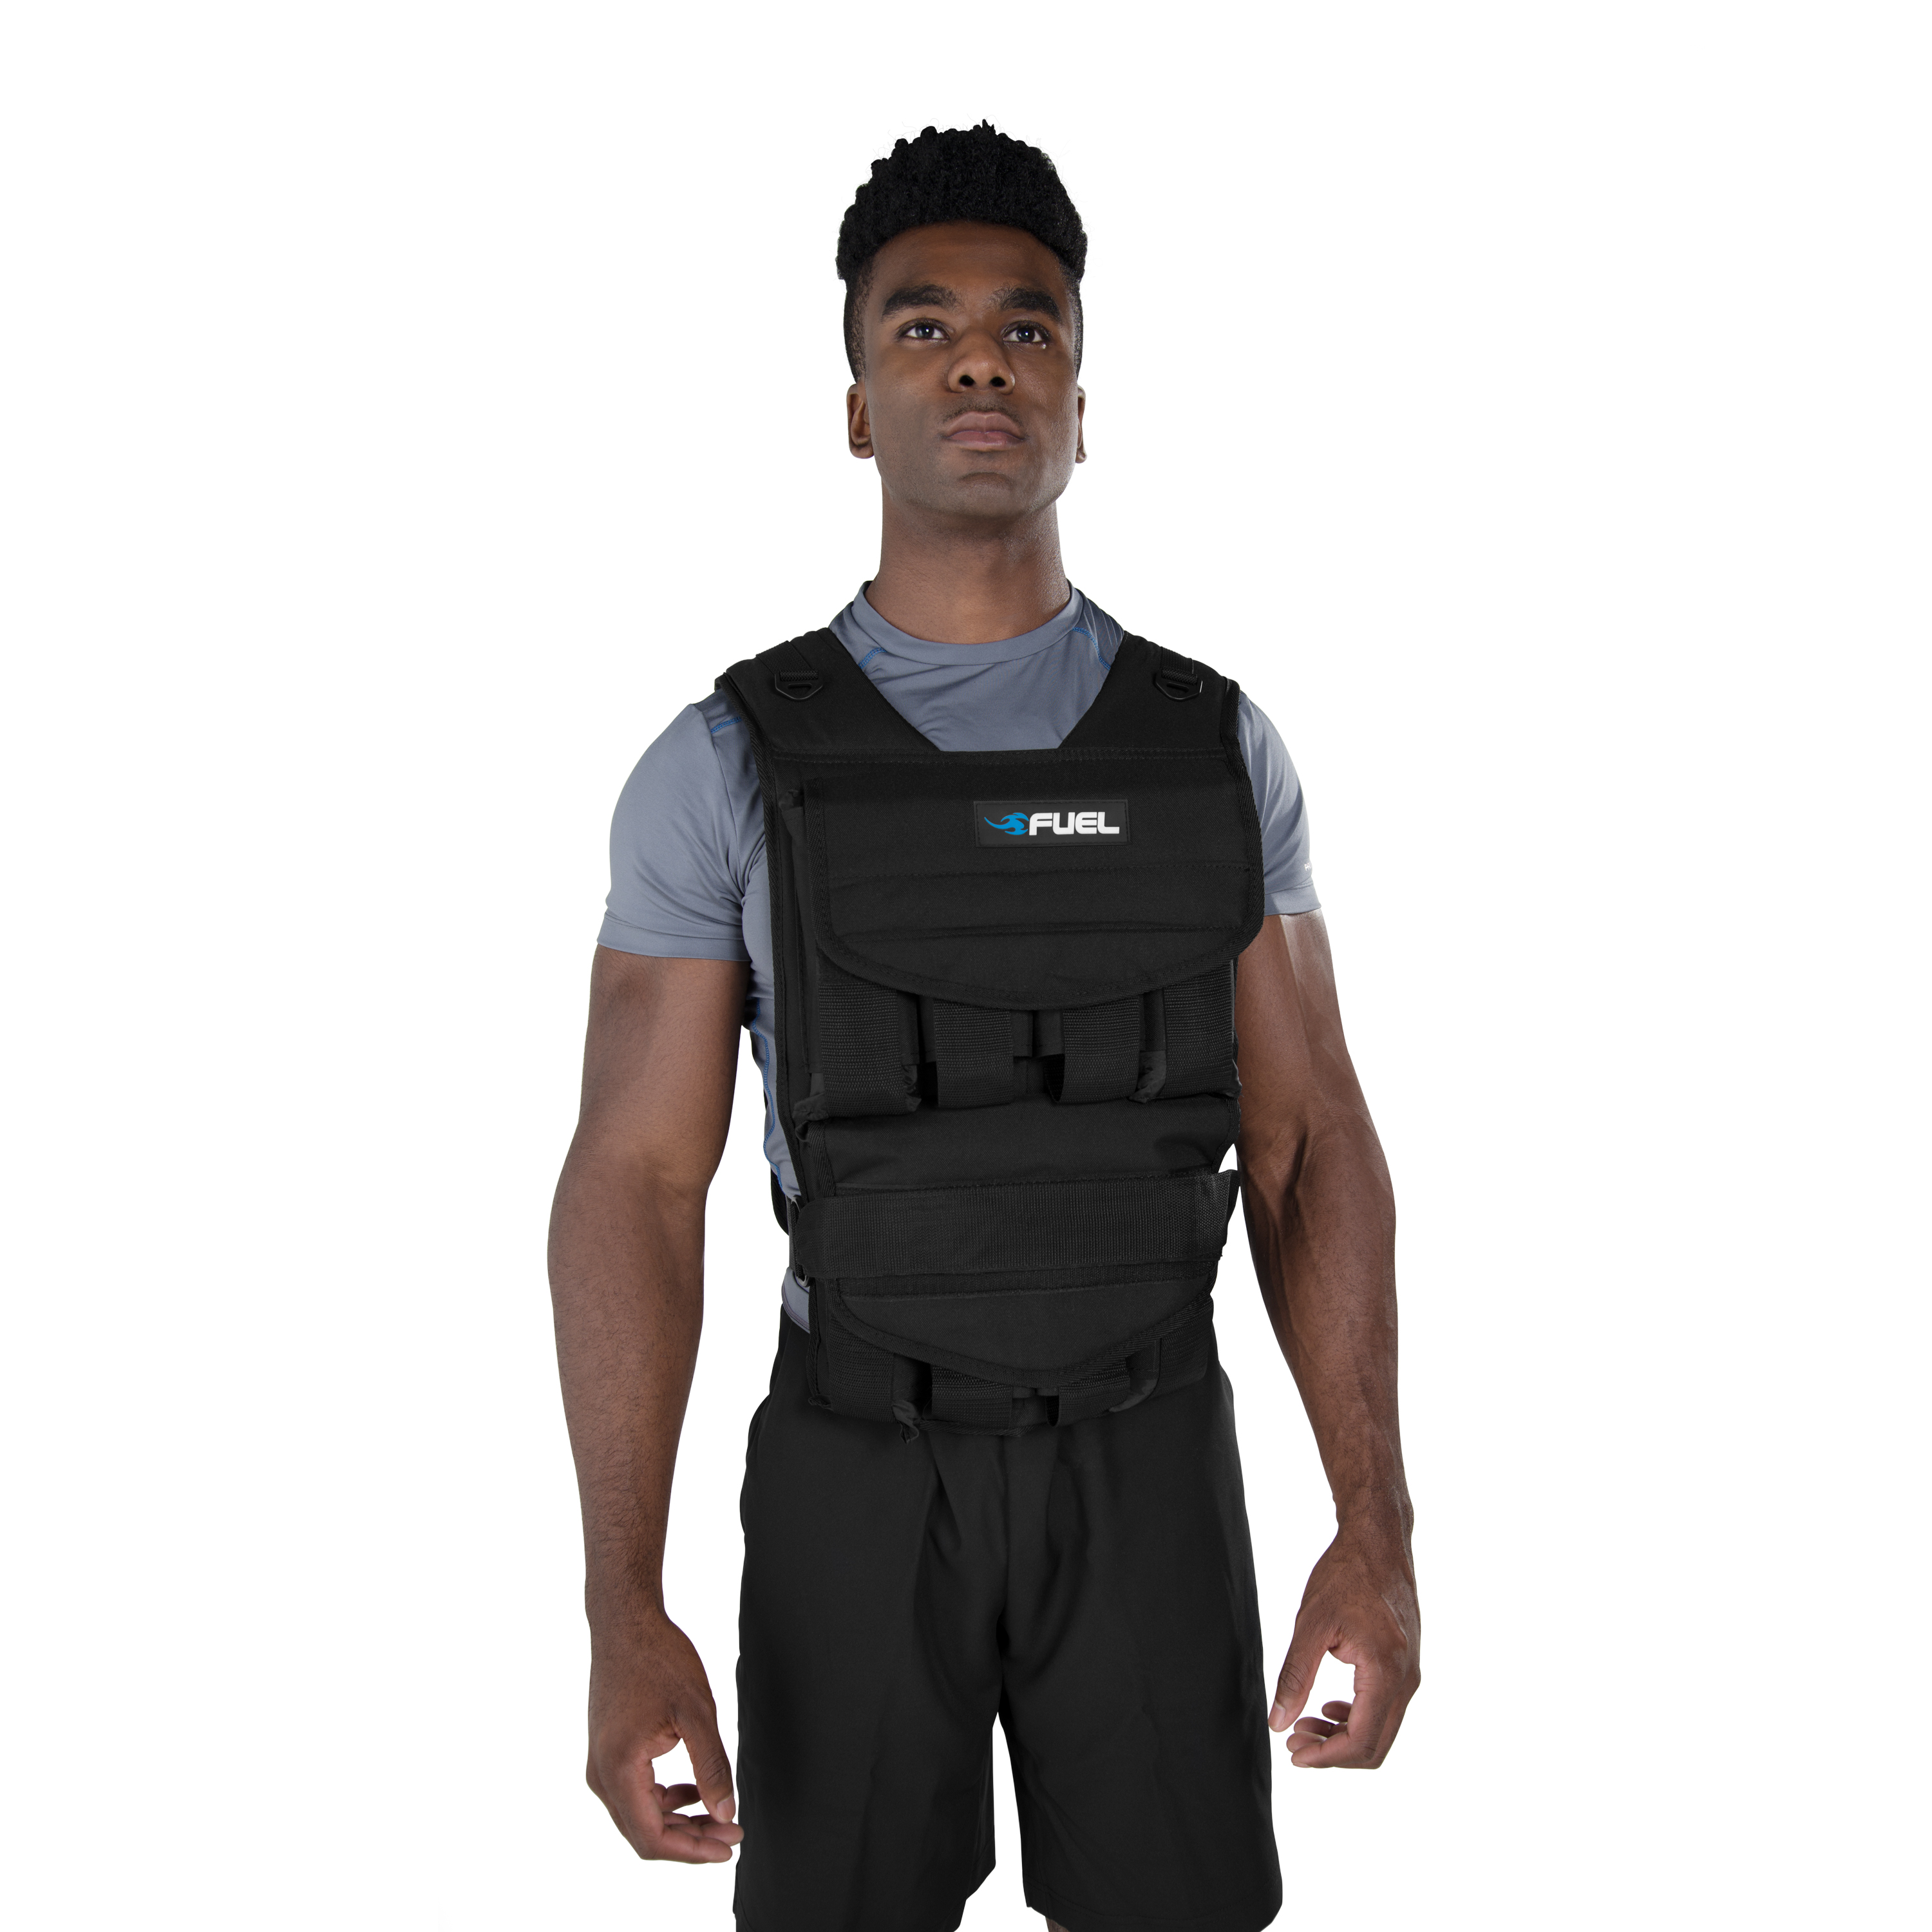 Fuel Pureformance Adjustable Weighted Fitness Vest, 40 Lb. - image 3 of 4